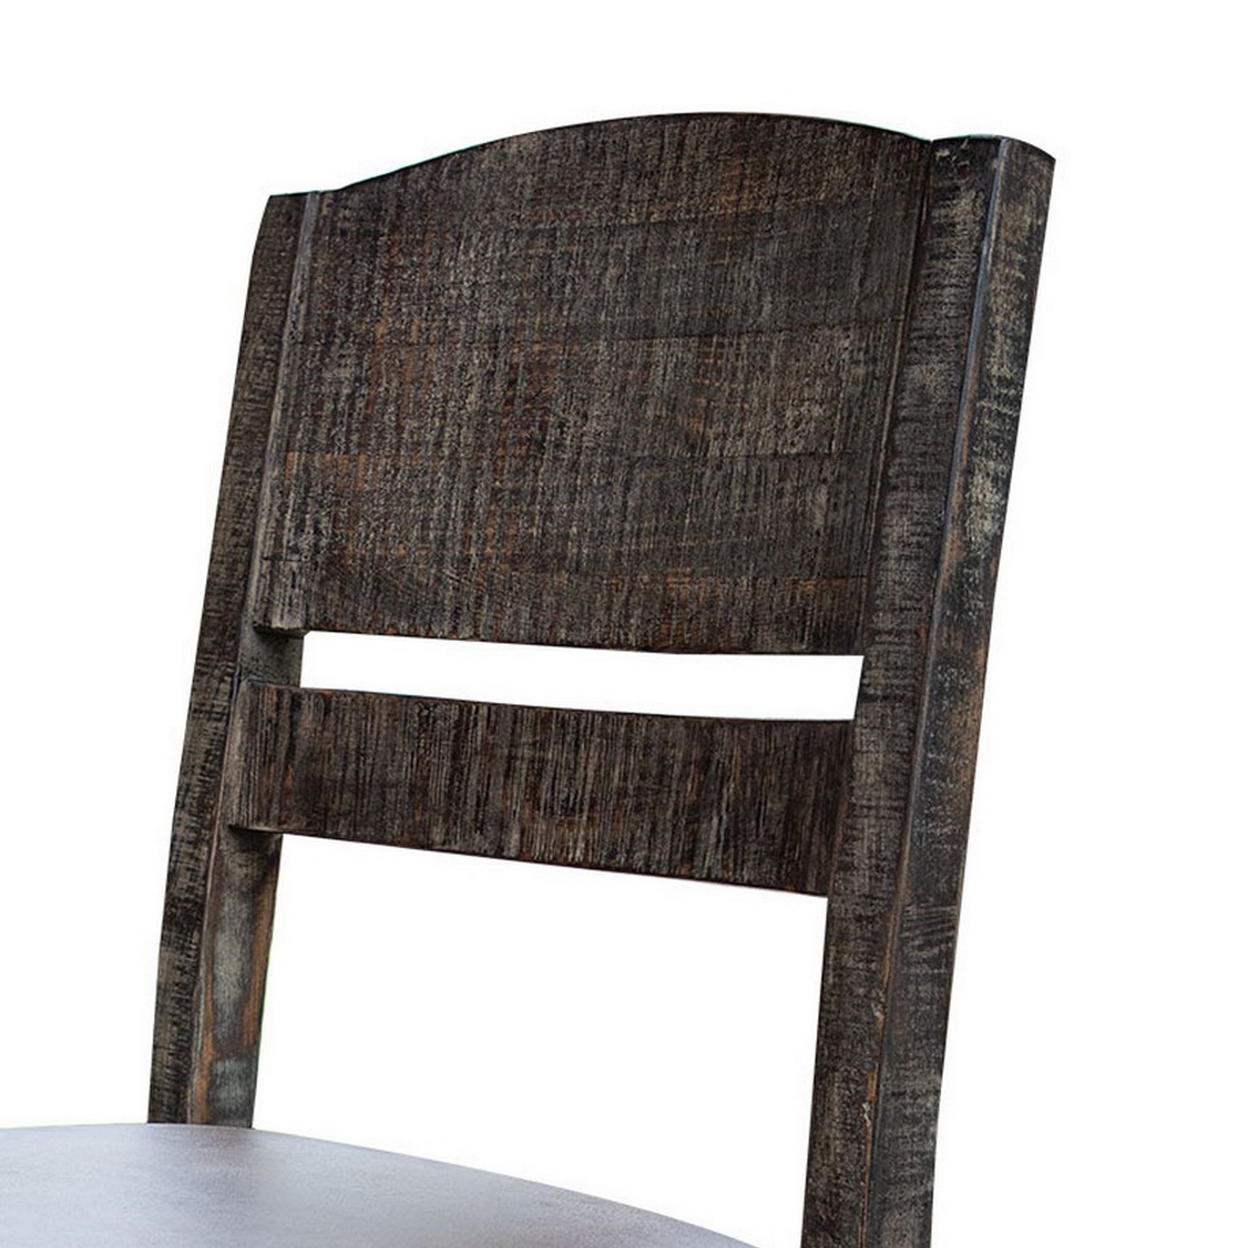 Noa 34 Inch Dining Chair, Solid Pine Wood, Panel Back, Distressed Brown- Saltoro Sherpi